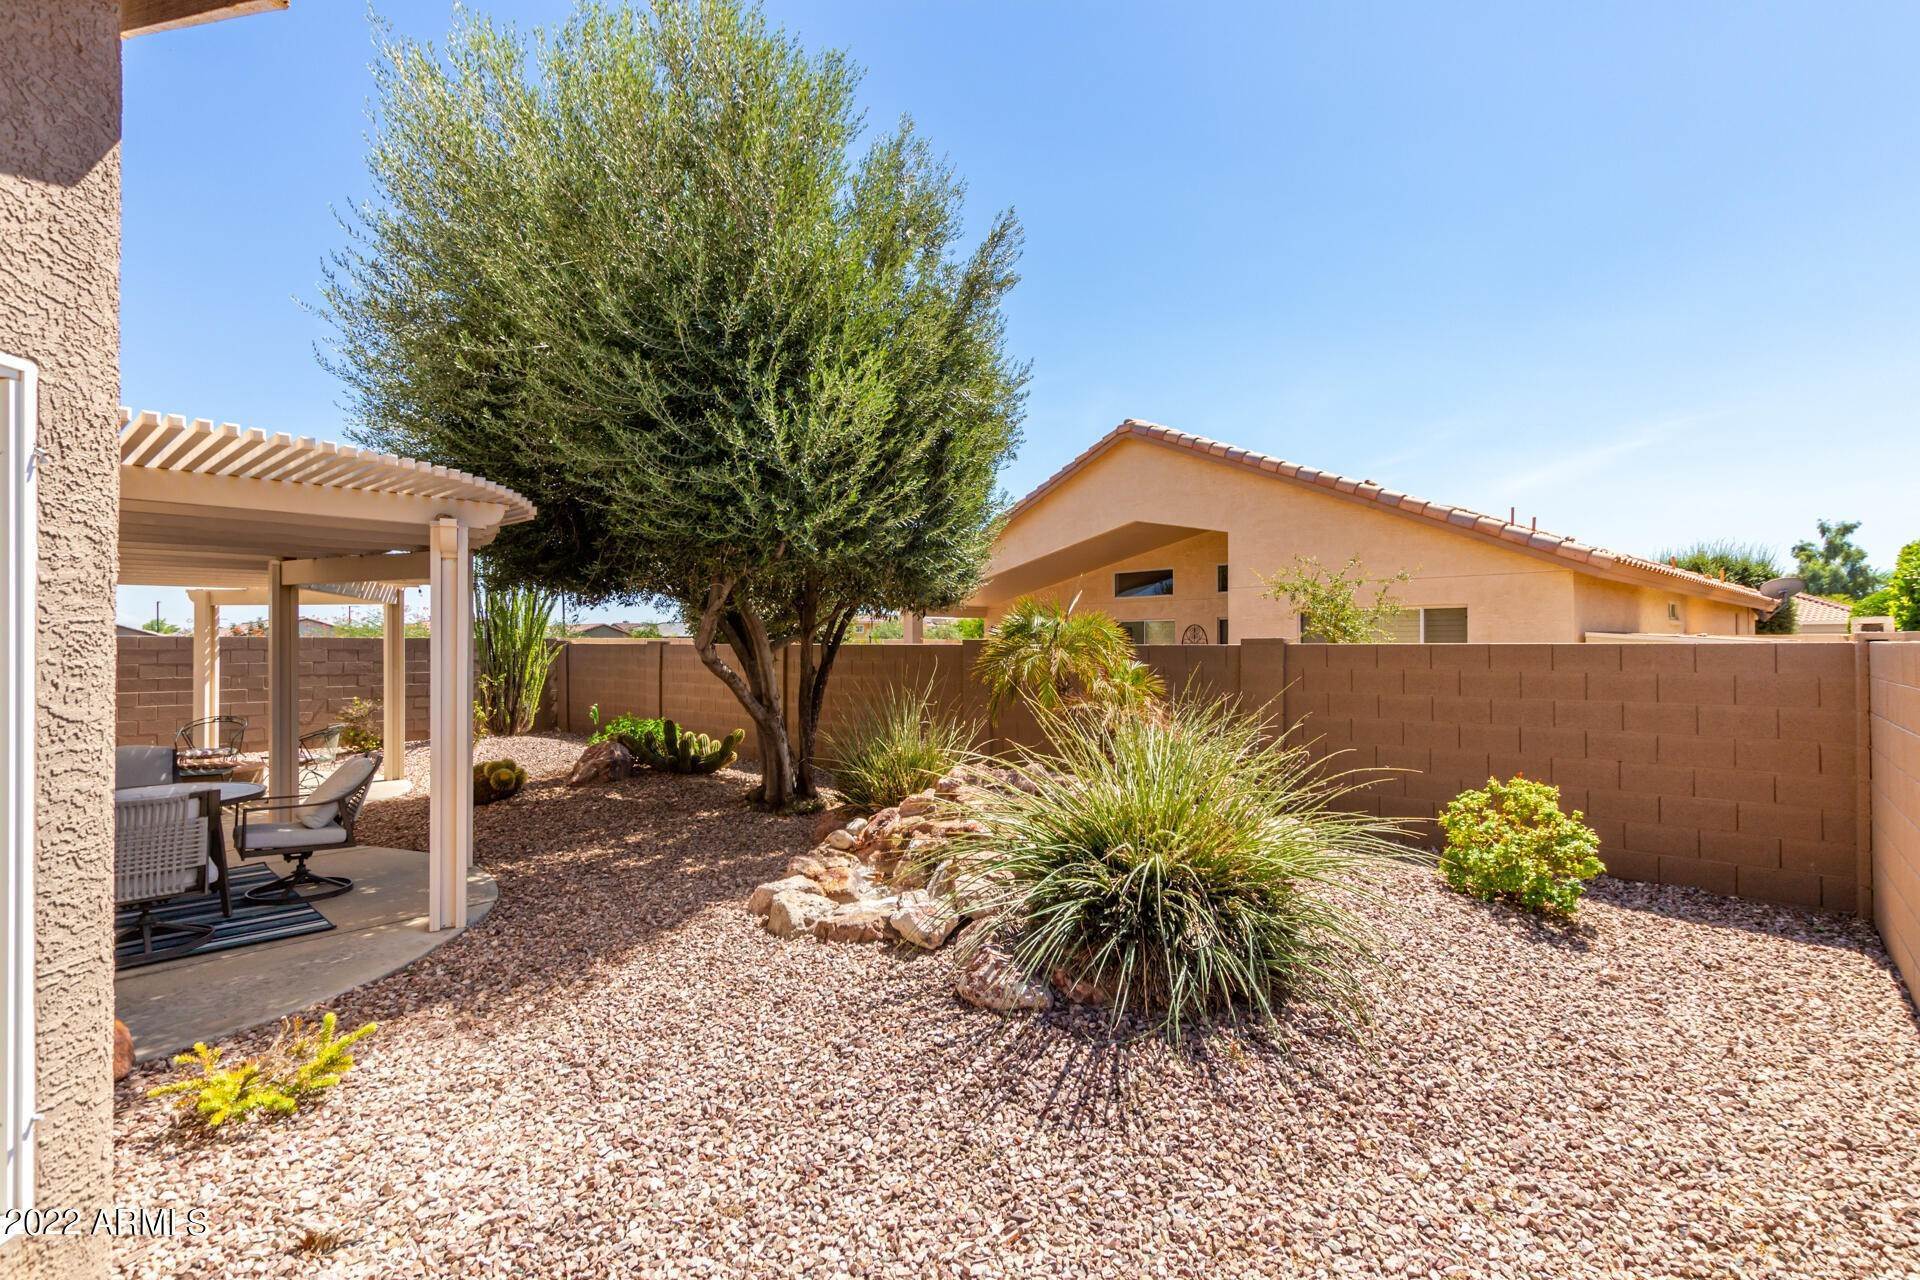 27. Single Family for Sale at Goodyear, AZ 85395